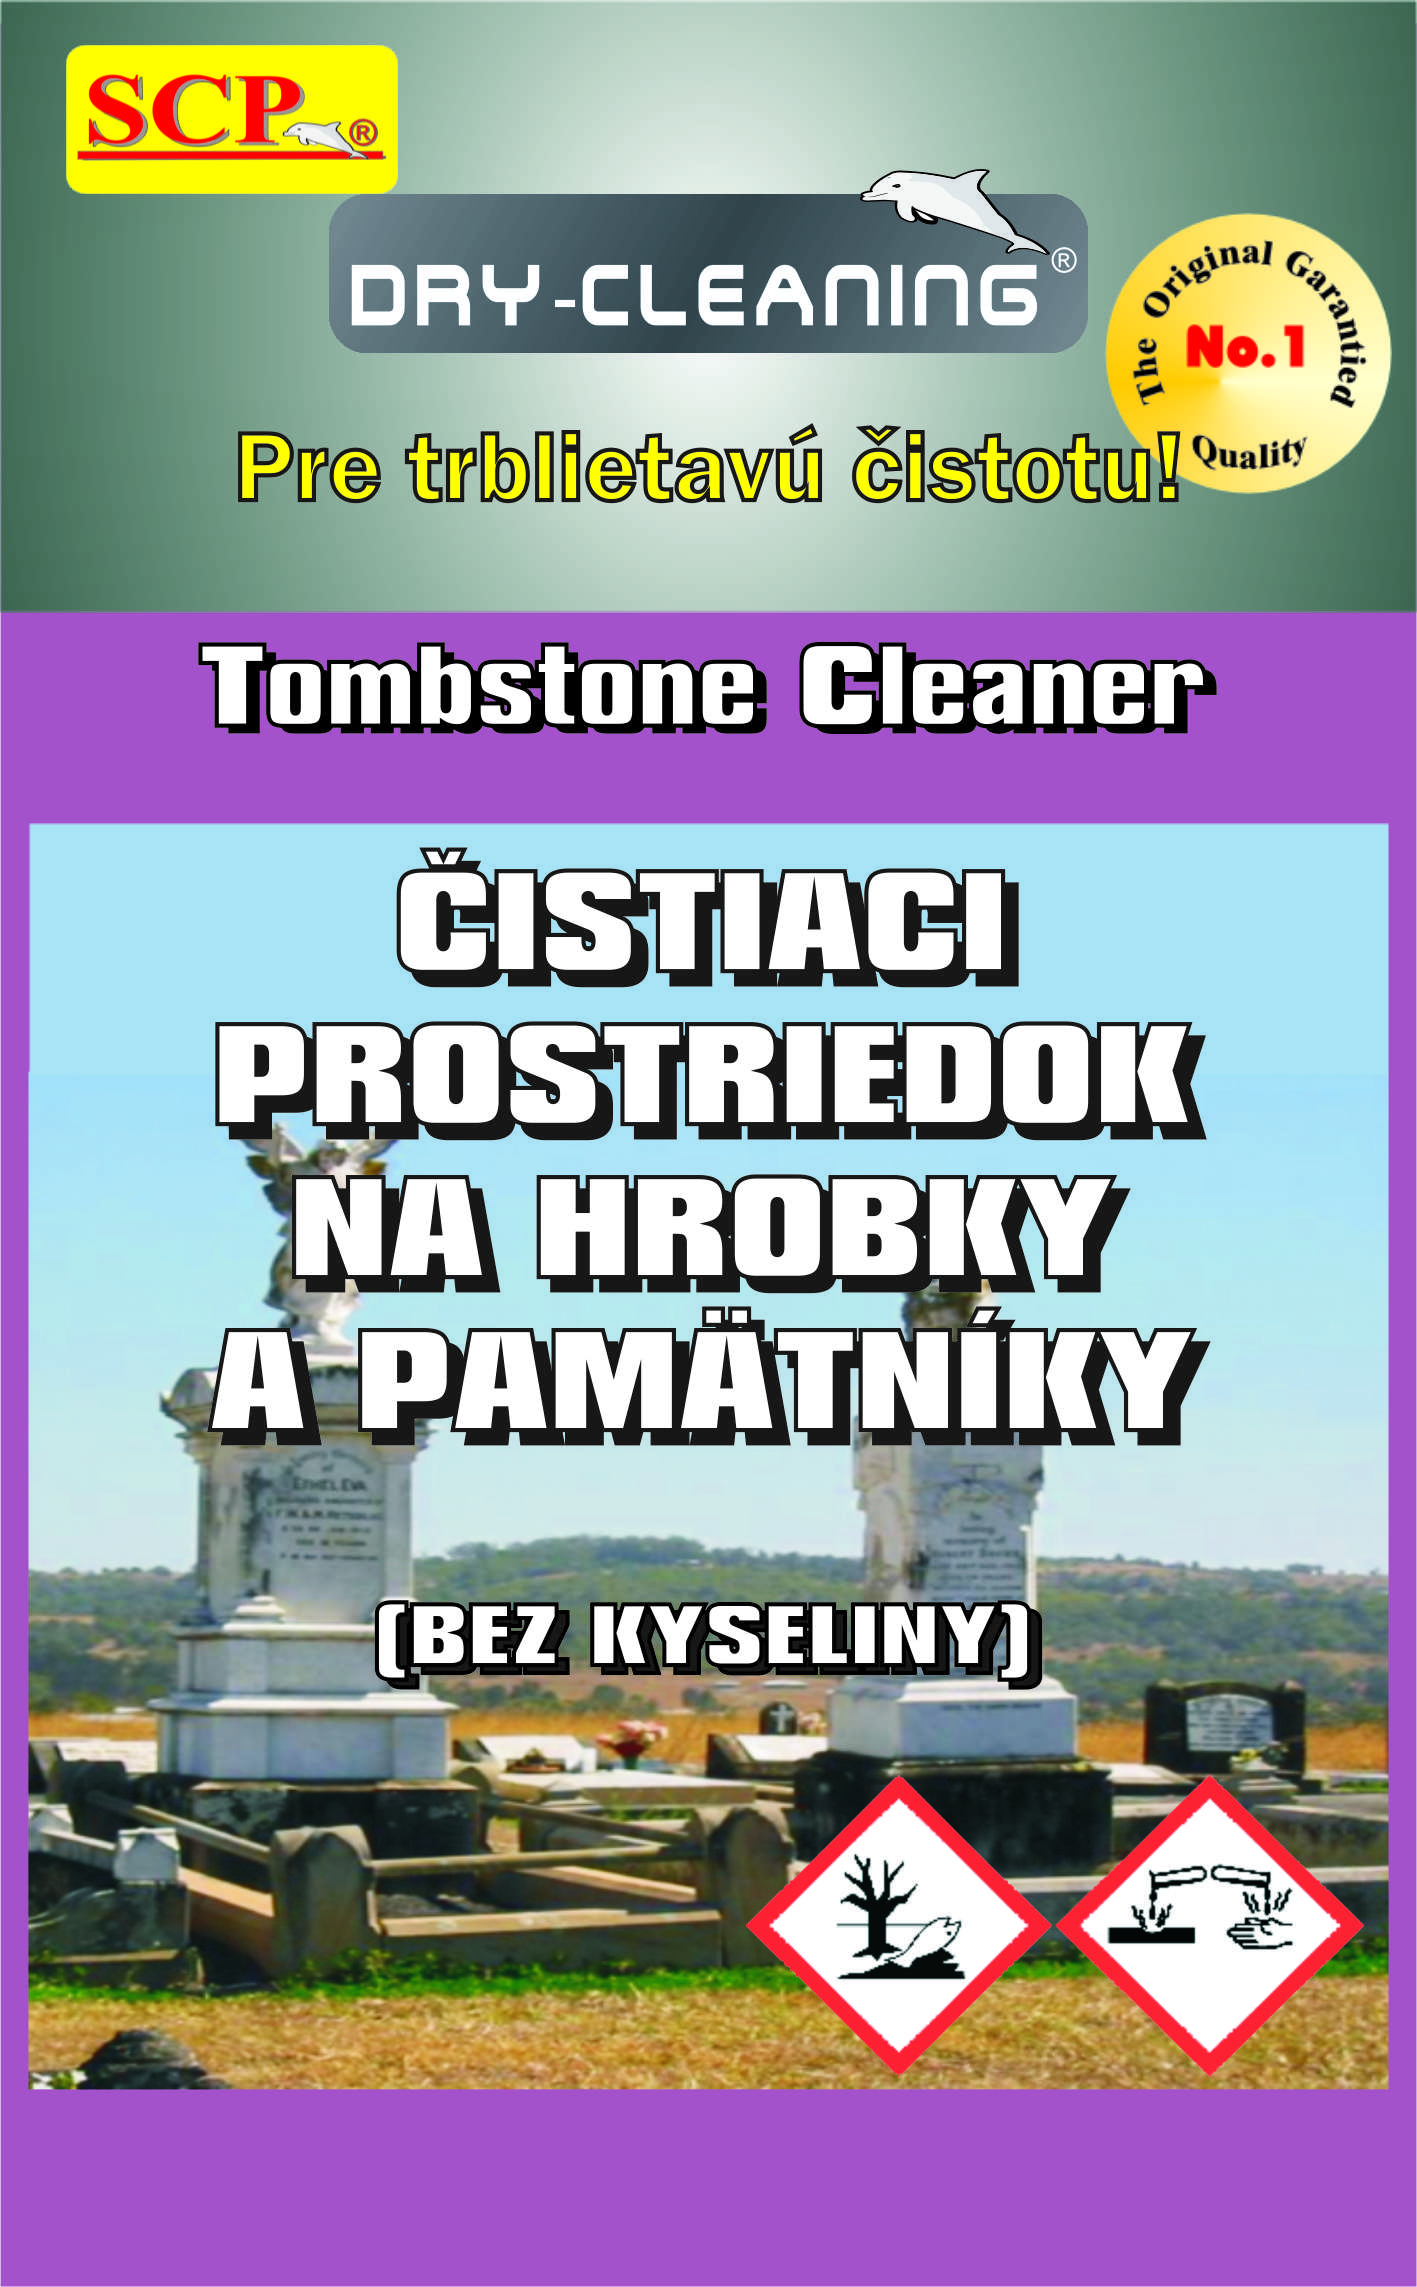 Tombstone Cleaner